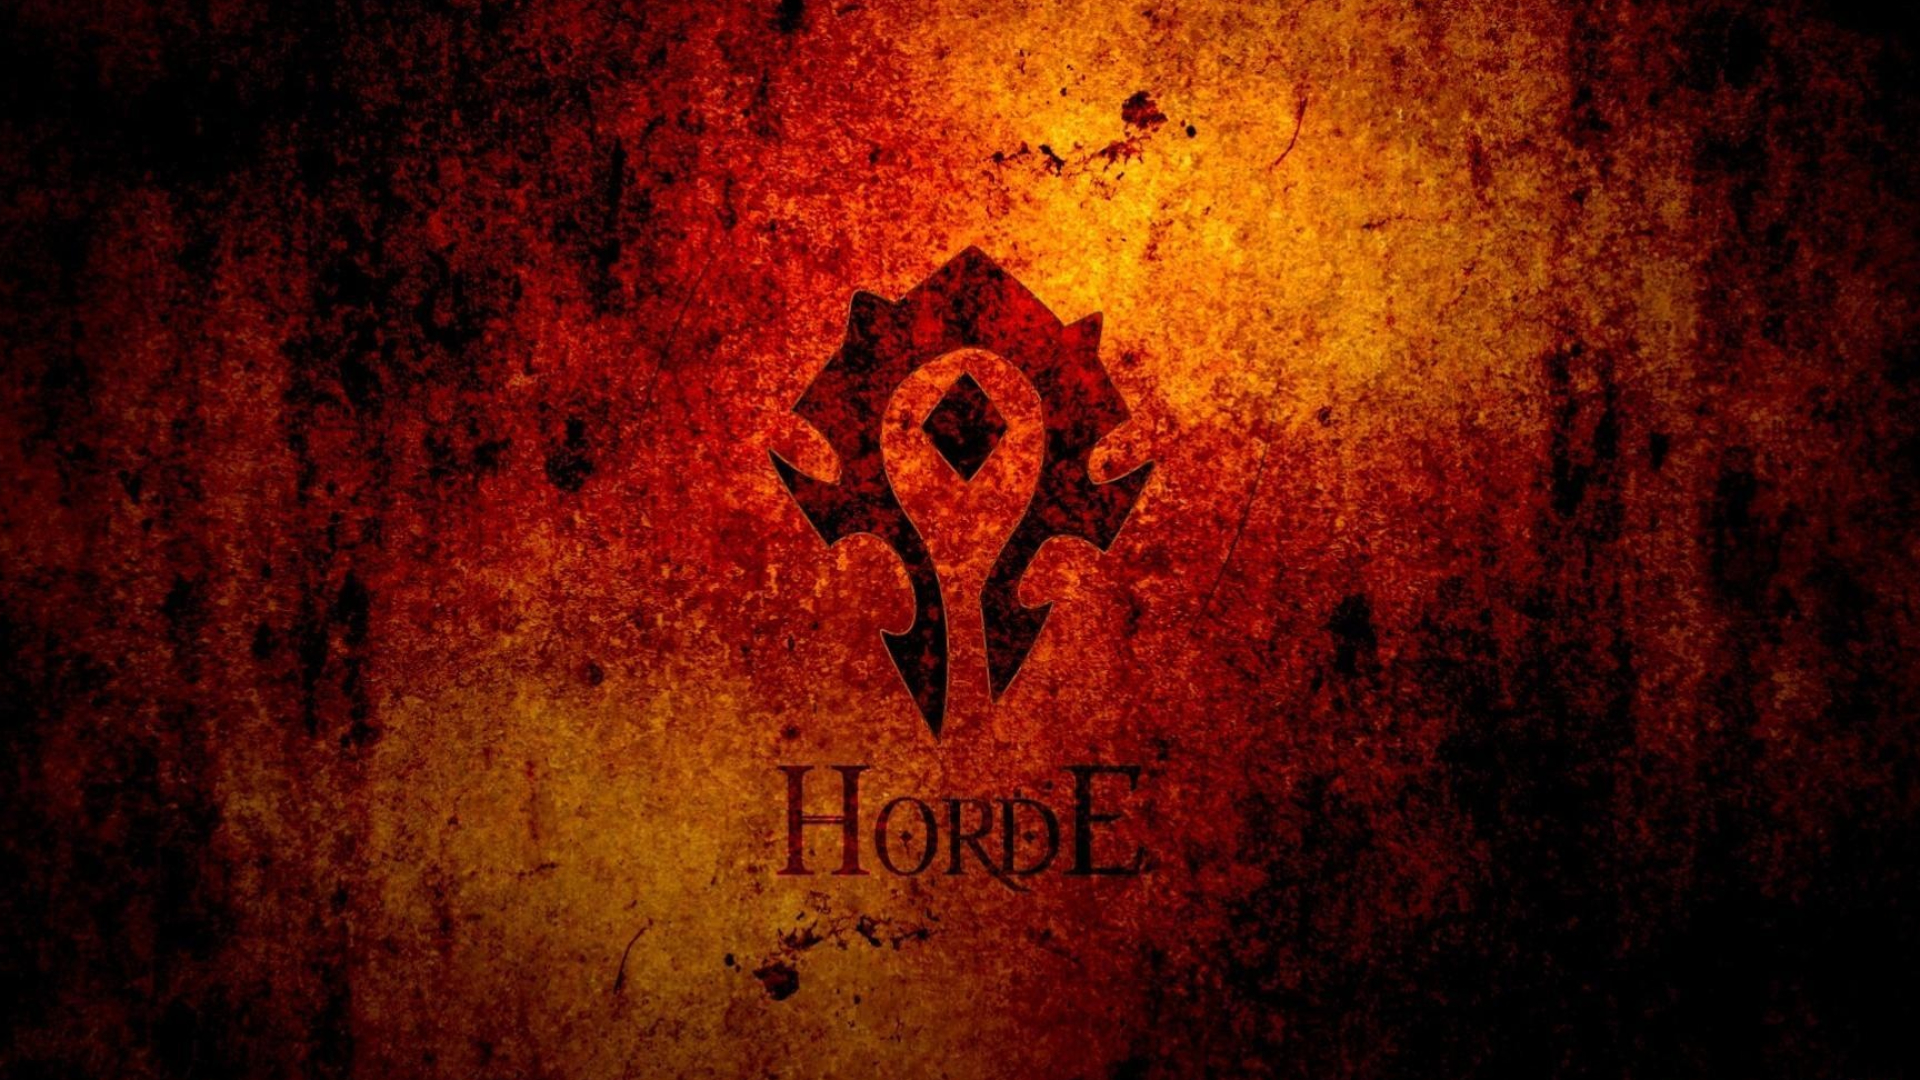 HD wallpaper, Coloring Horde Wallpaper, 1920X1080 Full Hd Desktop, Desktop 1080P Horde Wow Wallpaper Photo, Creative Expression, Artistic Inspiration, Personal Touch